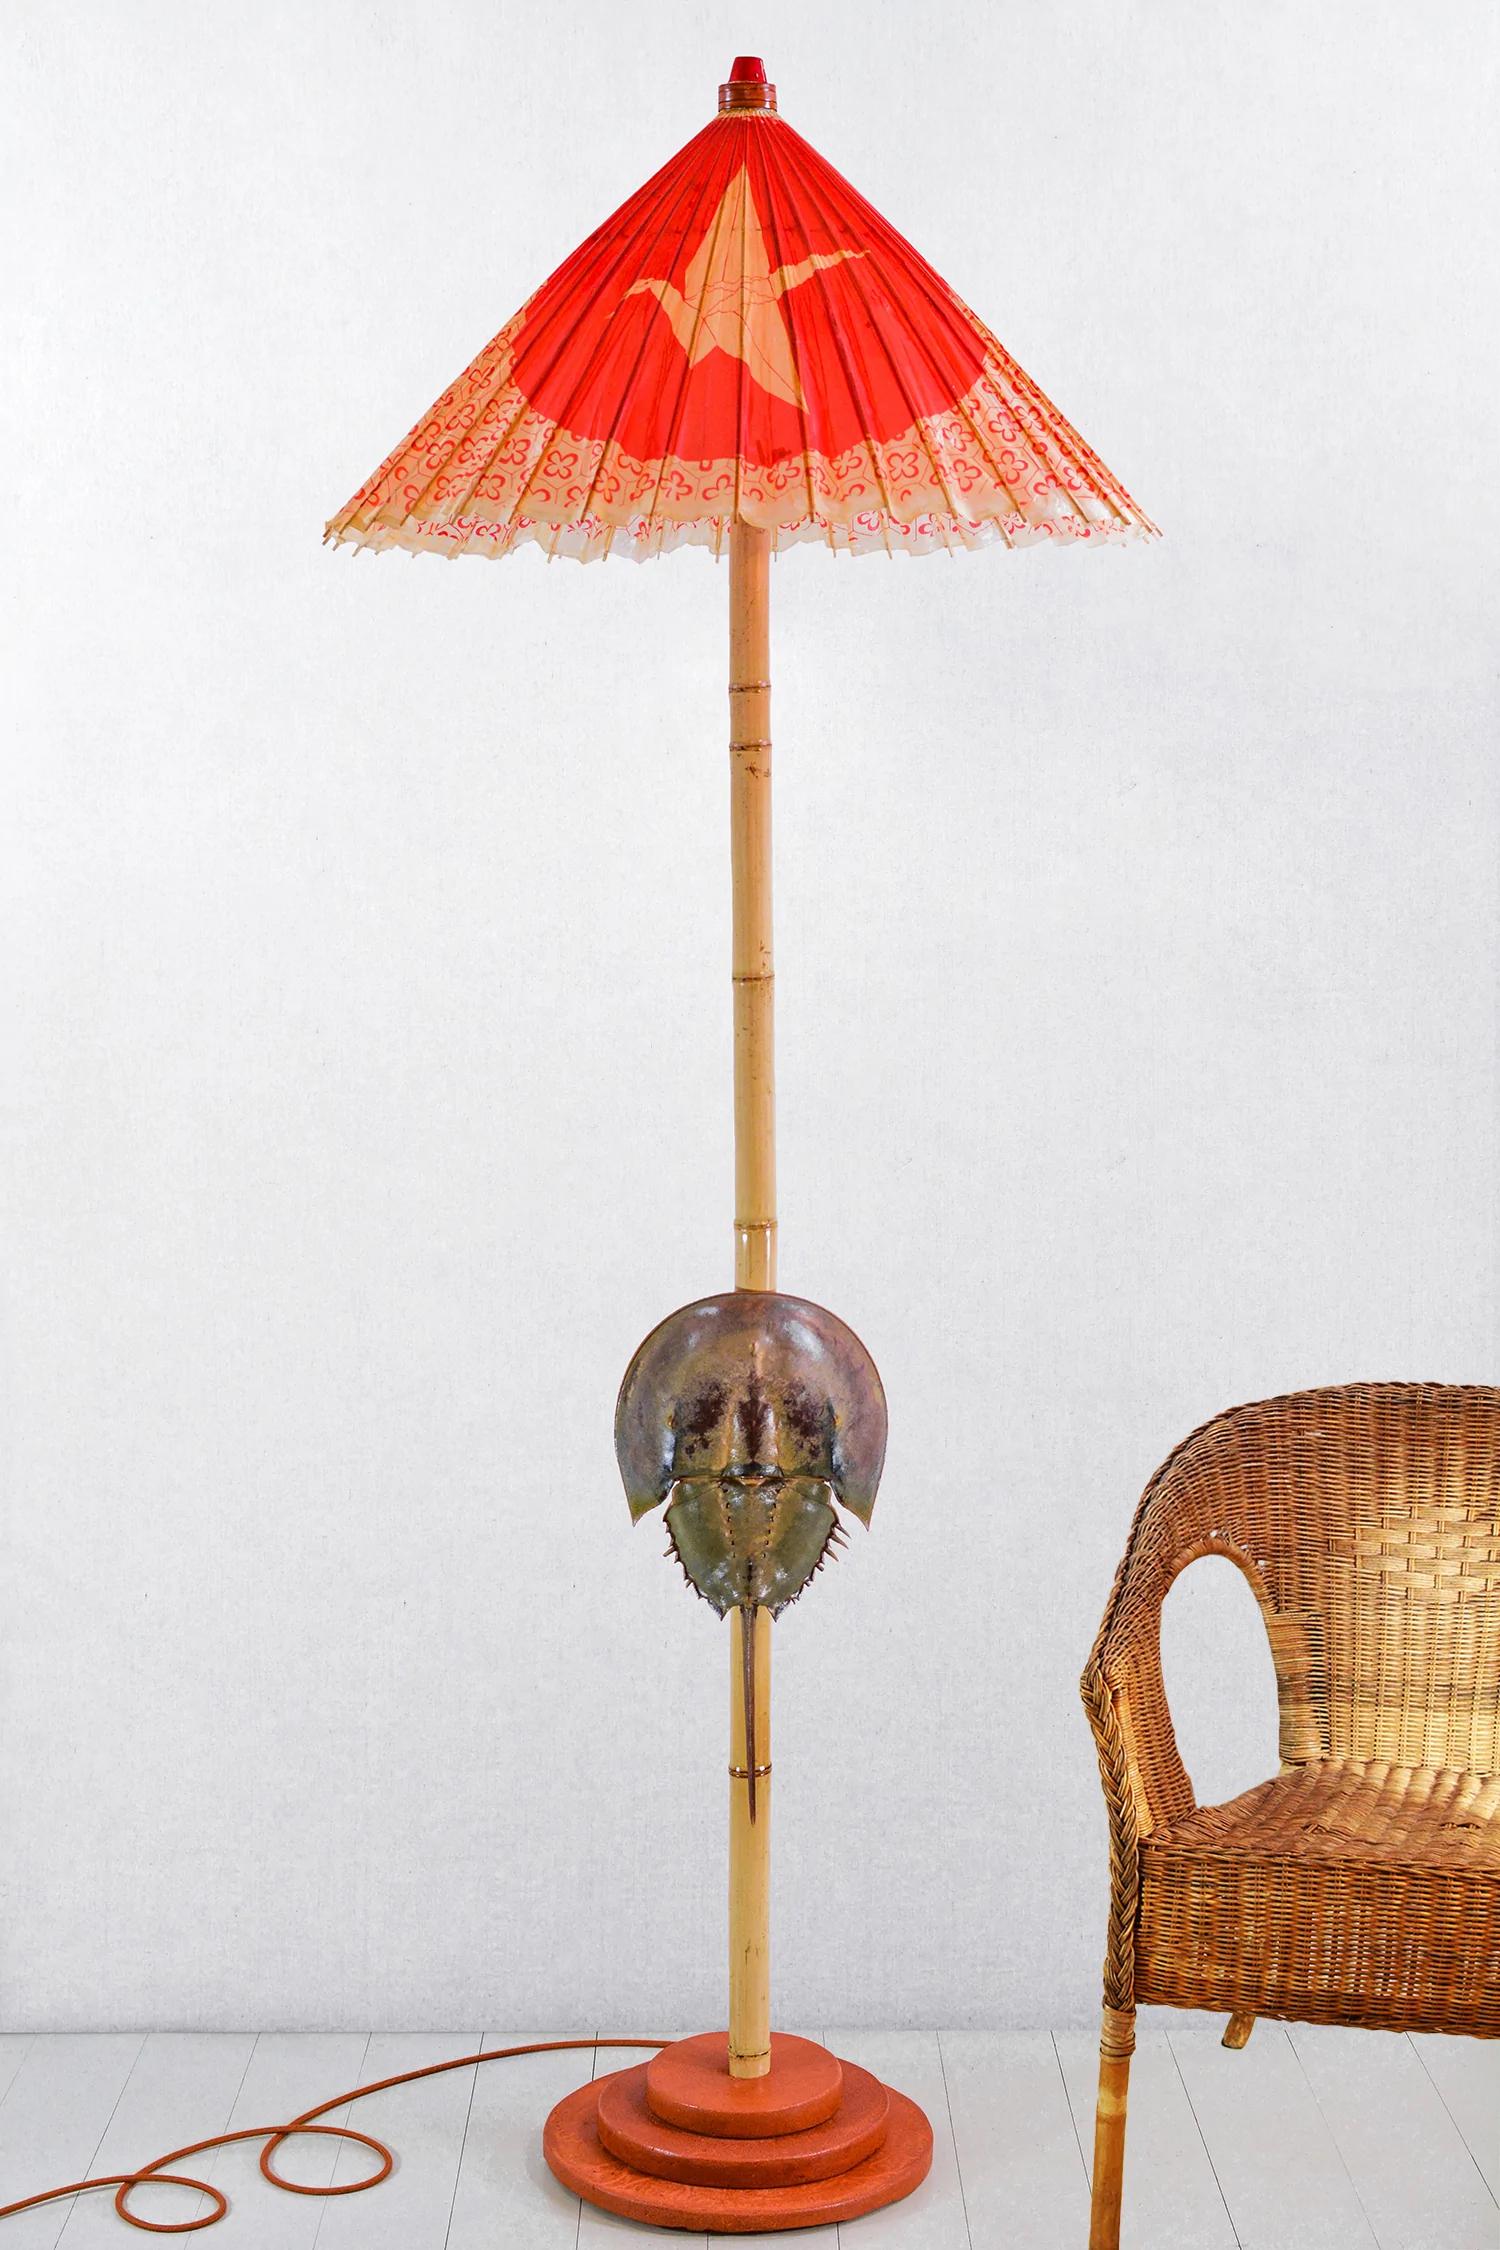 The Vanderbilt Collection consists of two one-of-a-kind monumental floor lamps from Christopher Tennant's 2022 solo exhibition at the Vanderbilt Museum in Long Island, New York, inspired by the tastes and eccentricities of globetrotting amateur